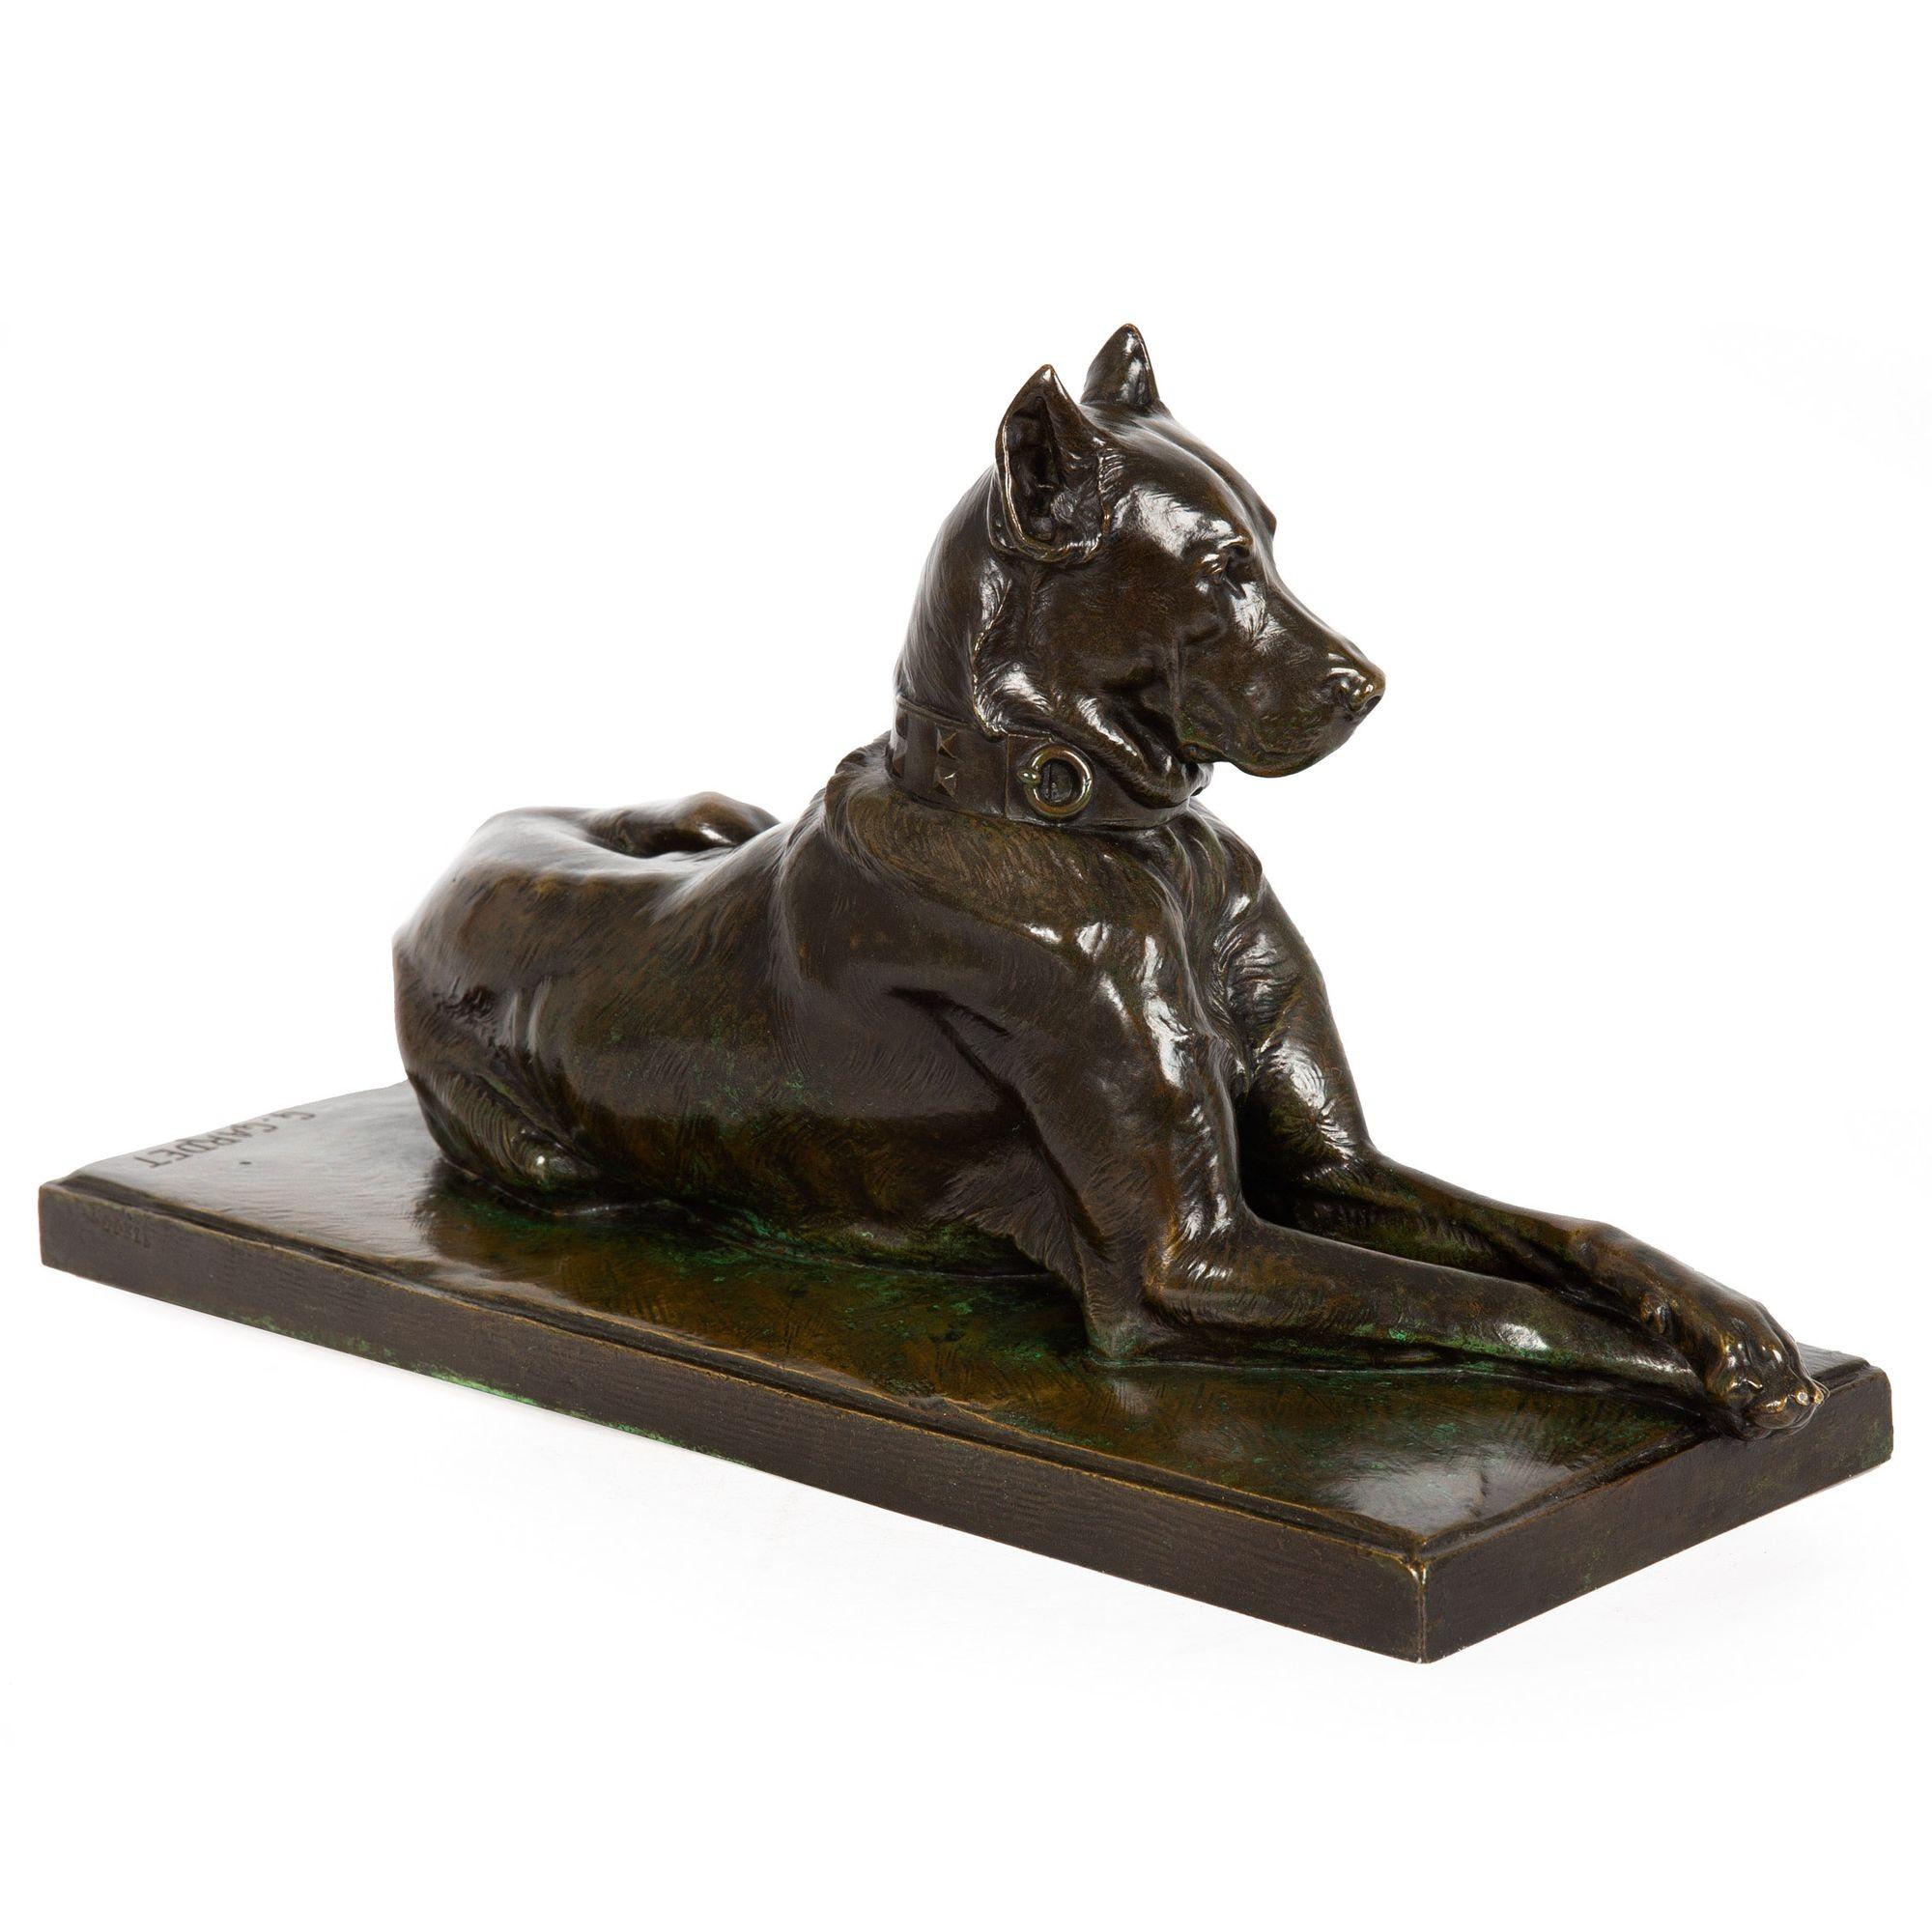 20th Century French Antique Bronze Sculpture “Resting Great Dane” by Georges Gardet